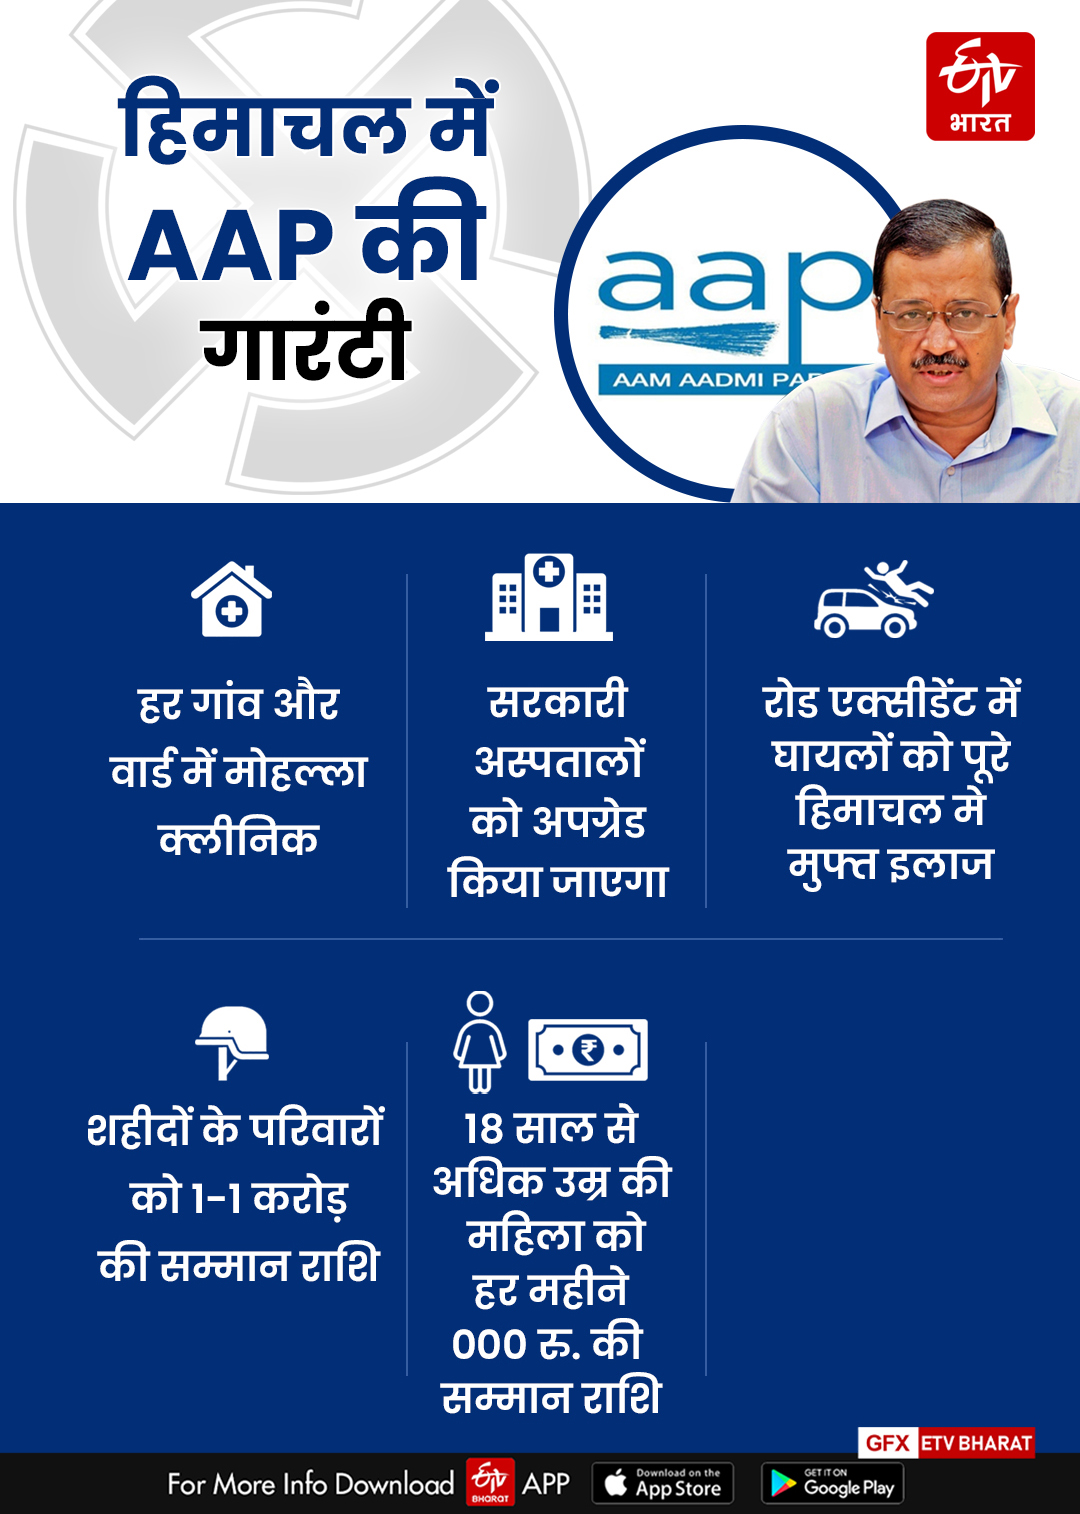 AAP Announced free scheme for himachal